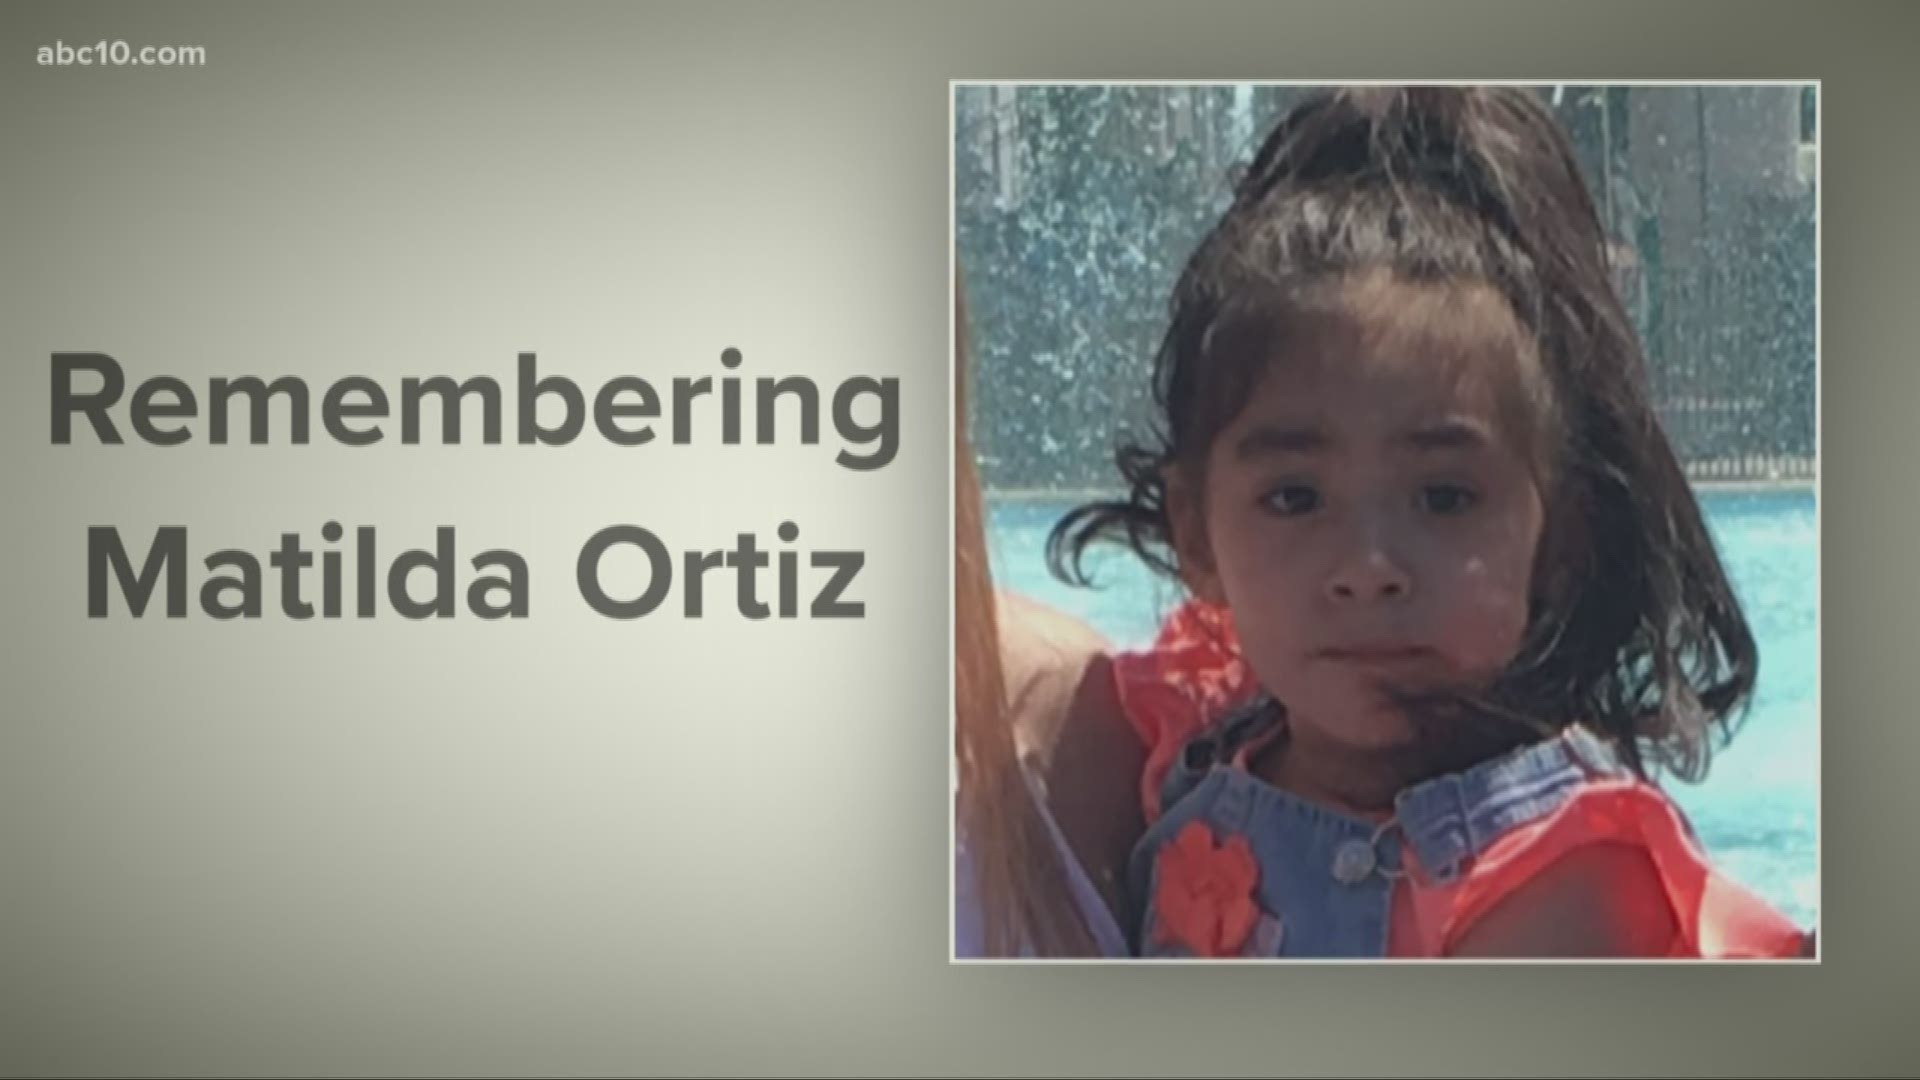 Sadly, Wednesday night, we must remember little 5-year-old Matilda Ortiz. Crews have been searching for her since Sunday, when she slipped and fell into the Stanislaus River. But Wednesday afternoon, deputies confirmed that her body was been found by search volunteers.